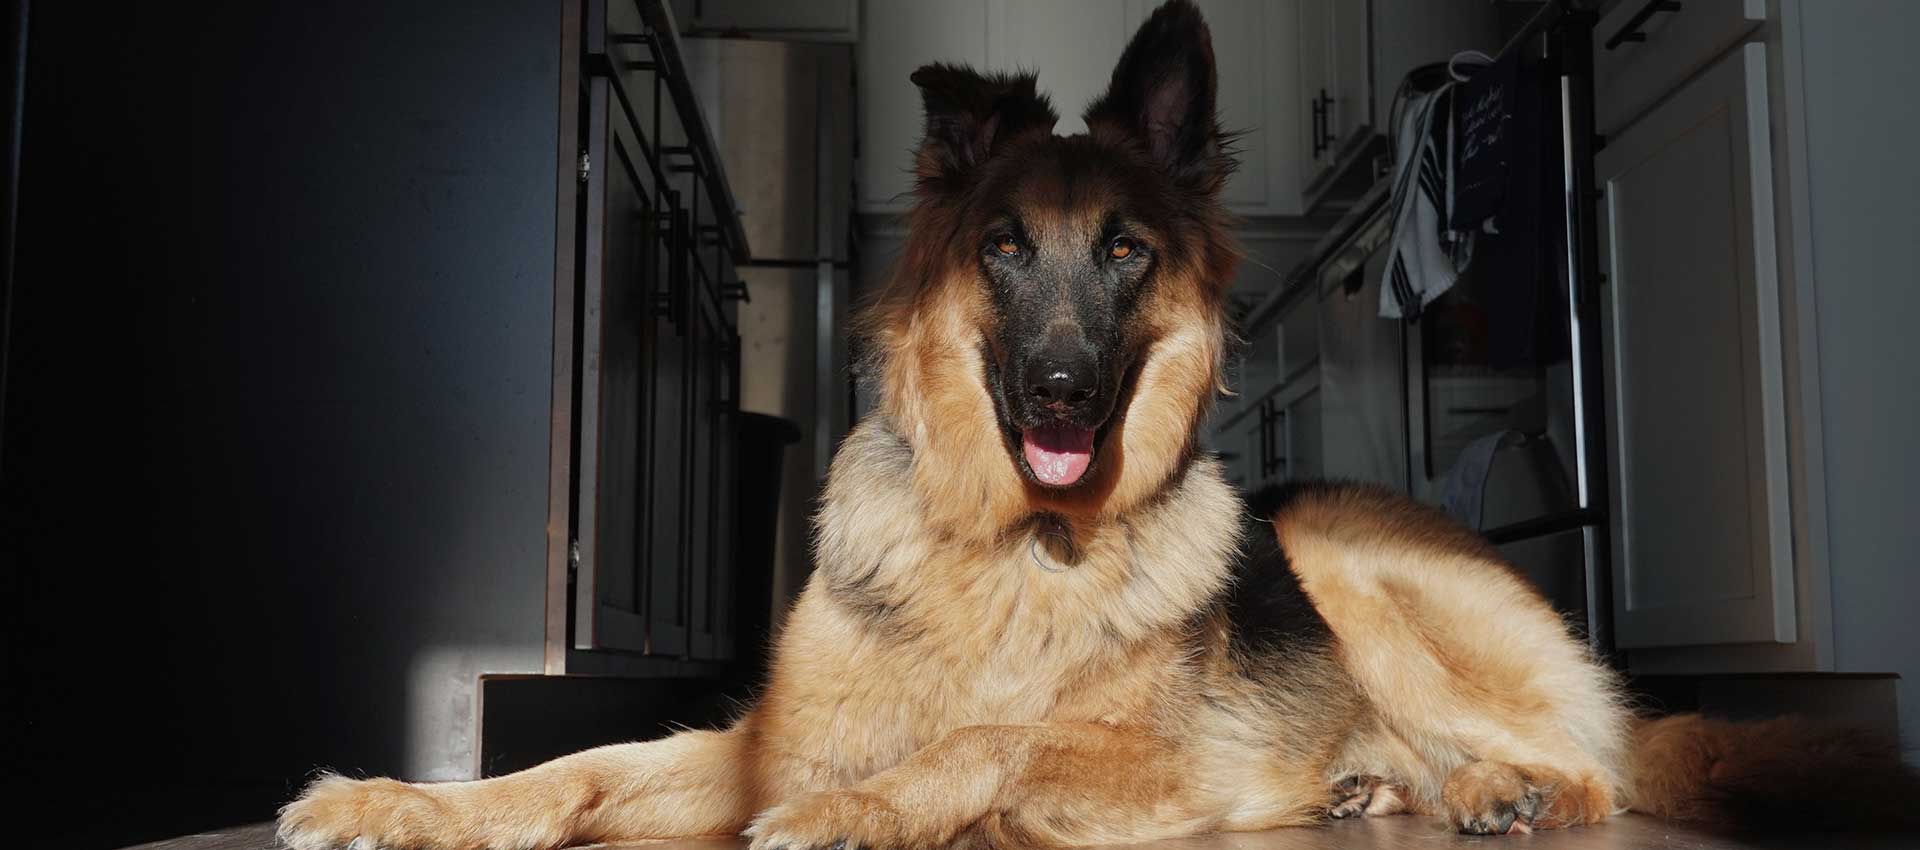 Are you a German Shephard lover? Check out the facts about the Color, Breed and Nutrition for German Shephard in Pakistan